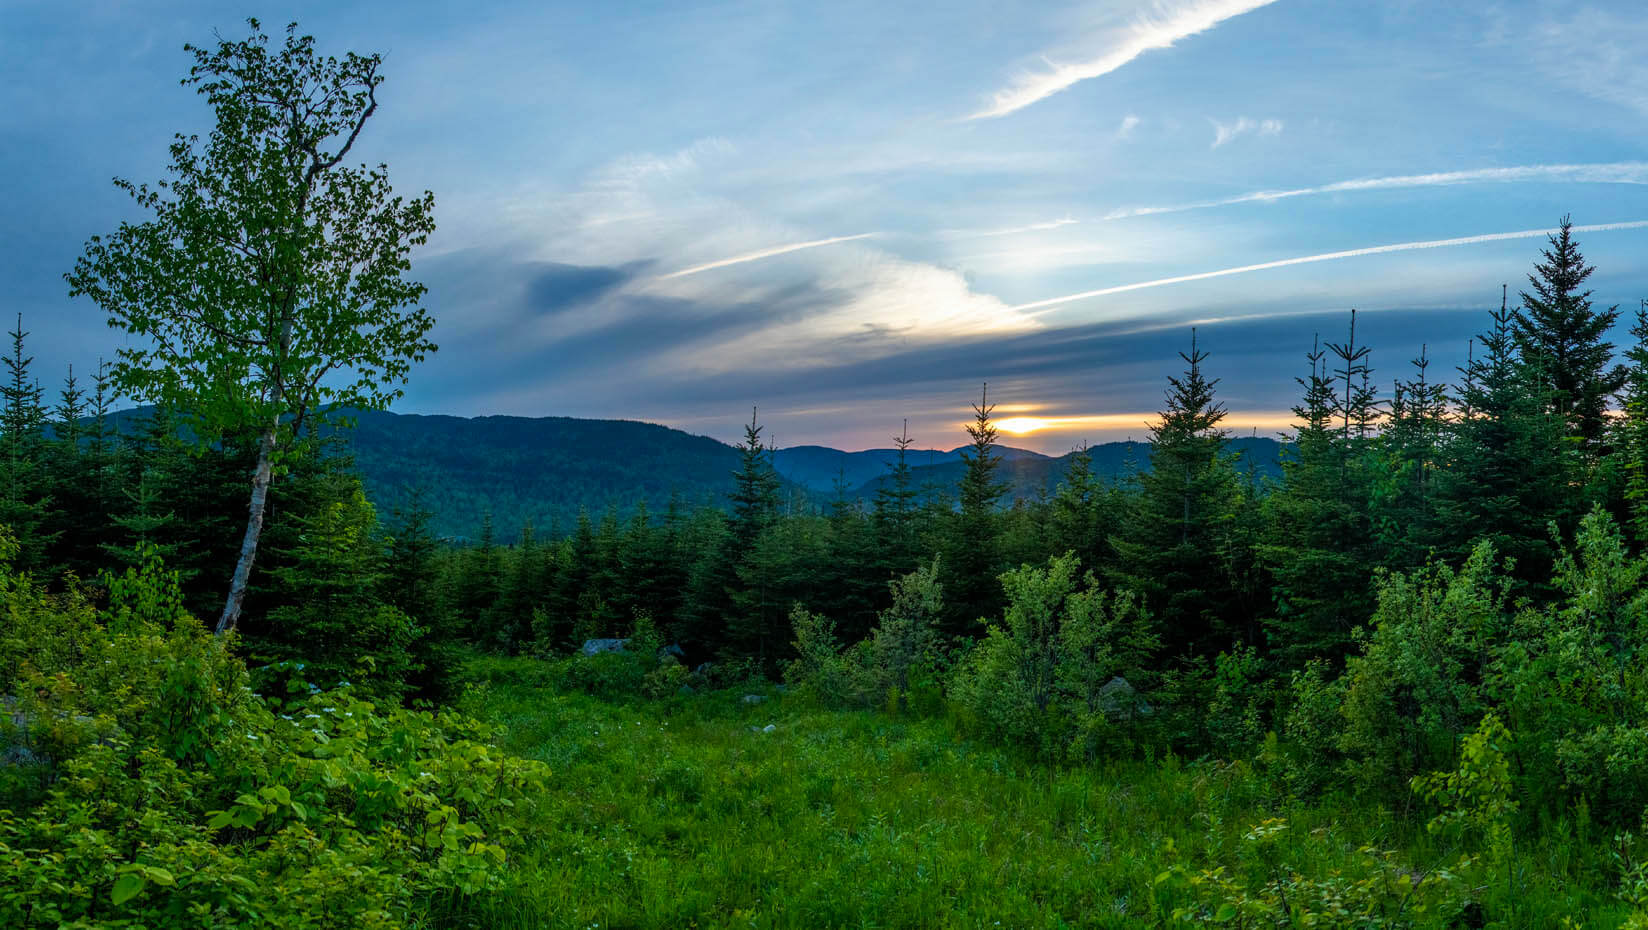 Maine forest and mountains